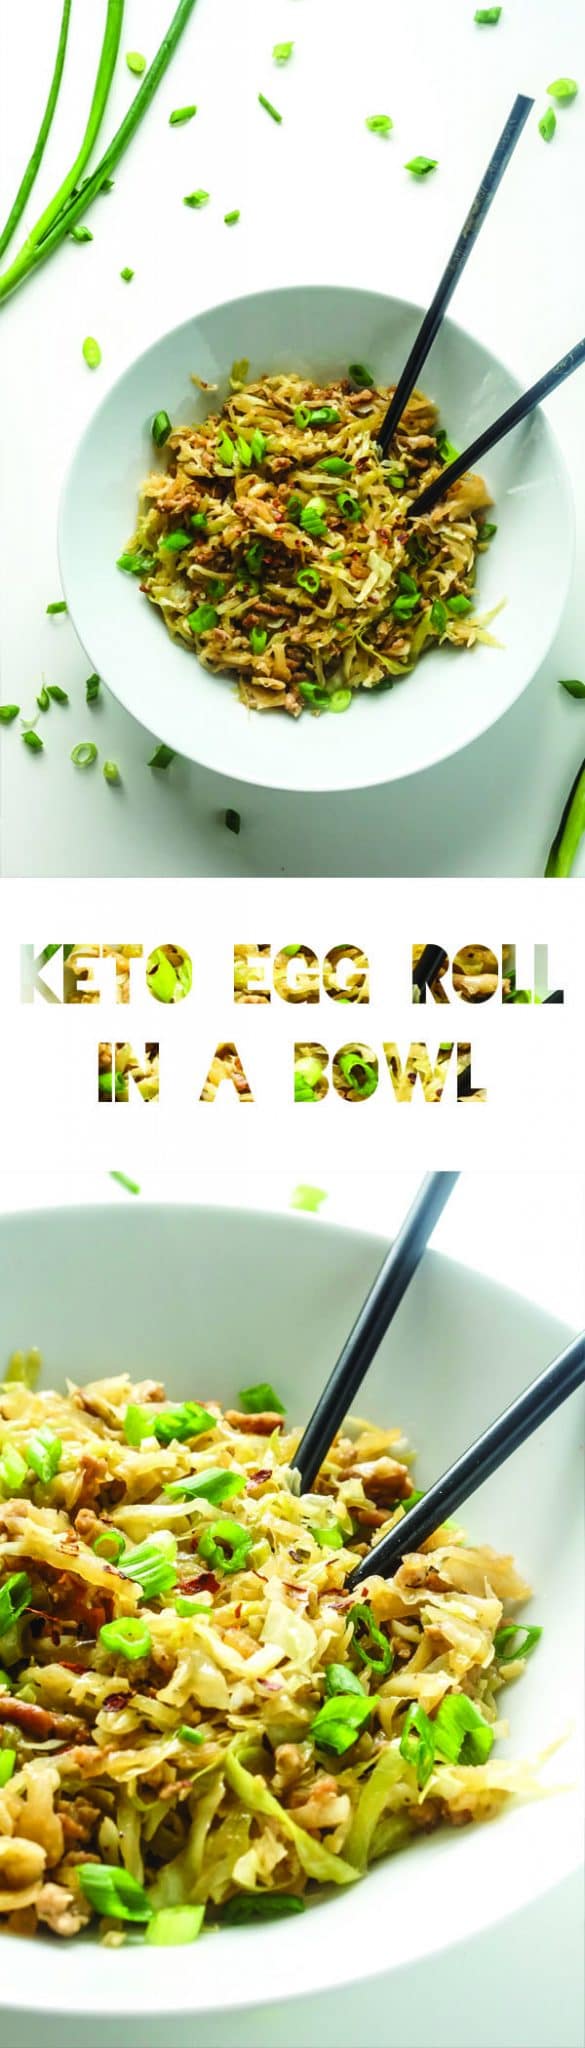 Keto Egg Roll in a Bowl Recipe | Cabbage | Low Carb Vegetable | Atkins | LCHF